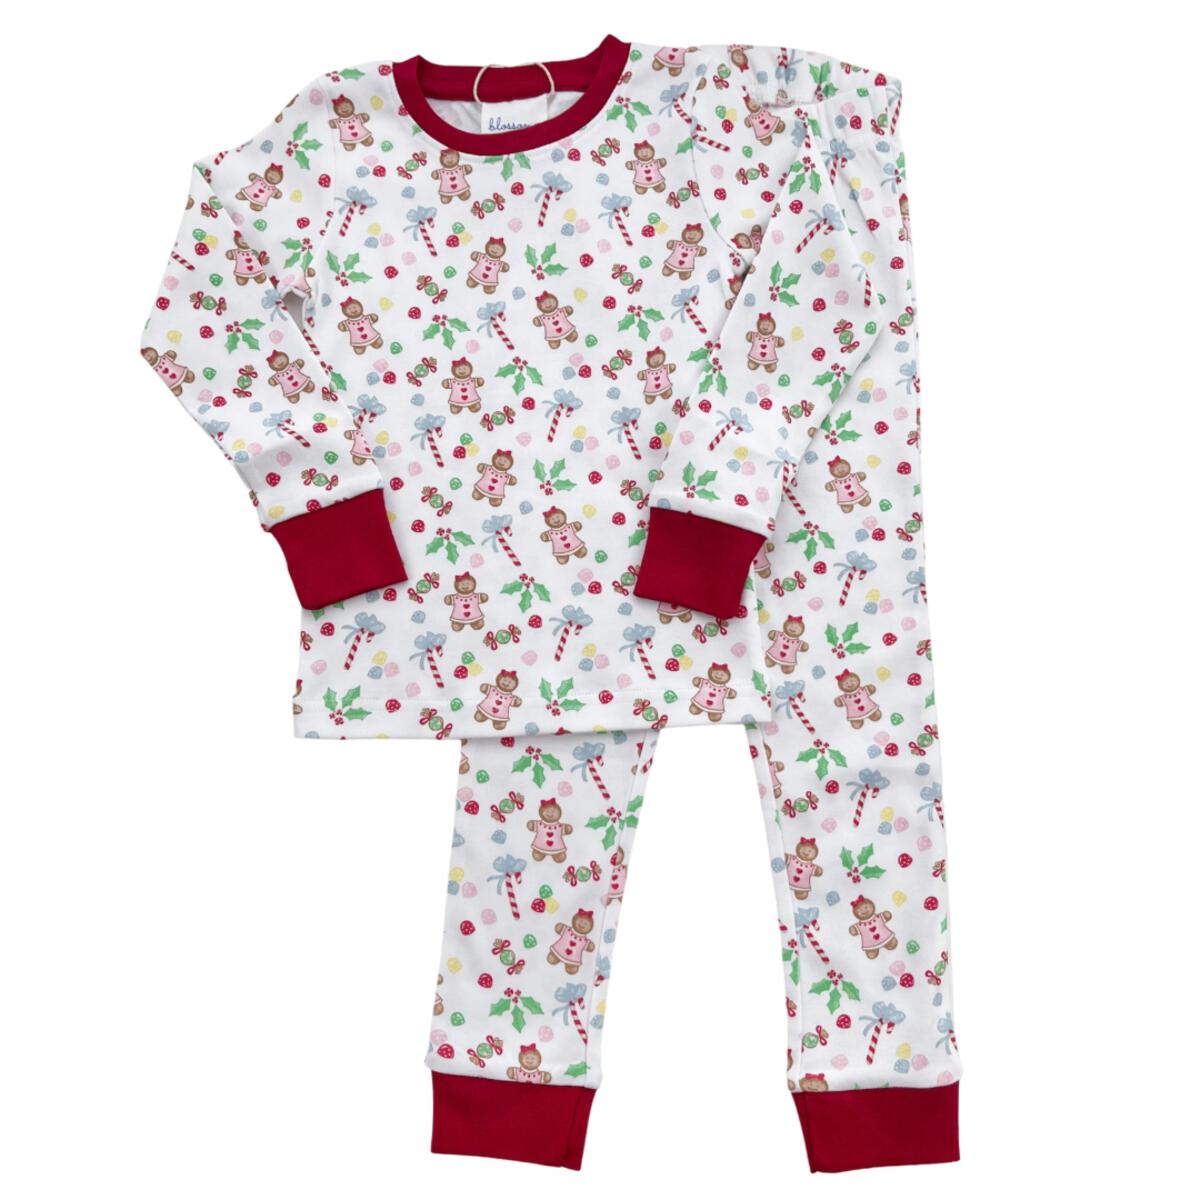 A Pink Gingerbread Pajama Pant Set from Chickie Collective for a baby.